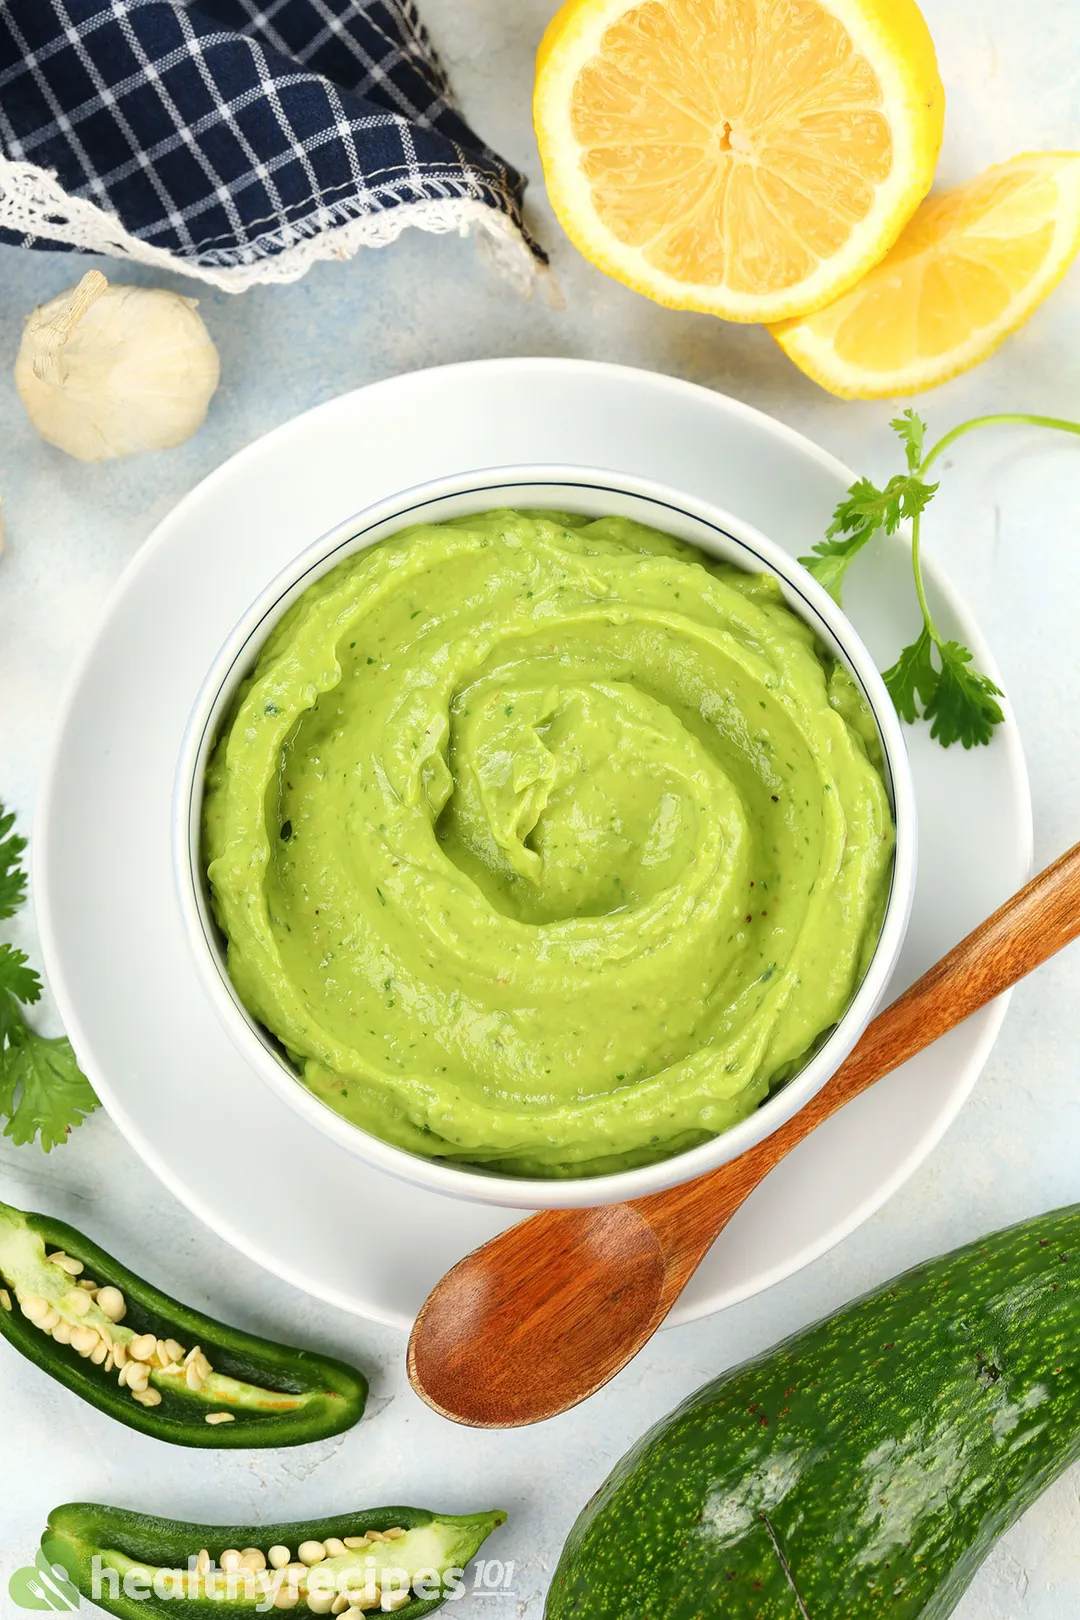 a bowl of avocado sauce on a plate with a wooden spoon, decorated with avocado, half jalapeno, lemon and garlic